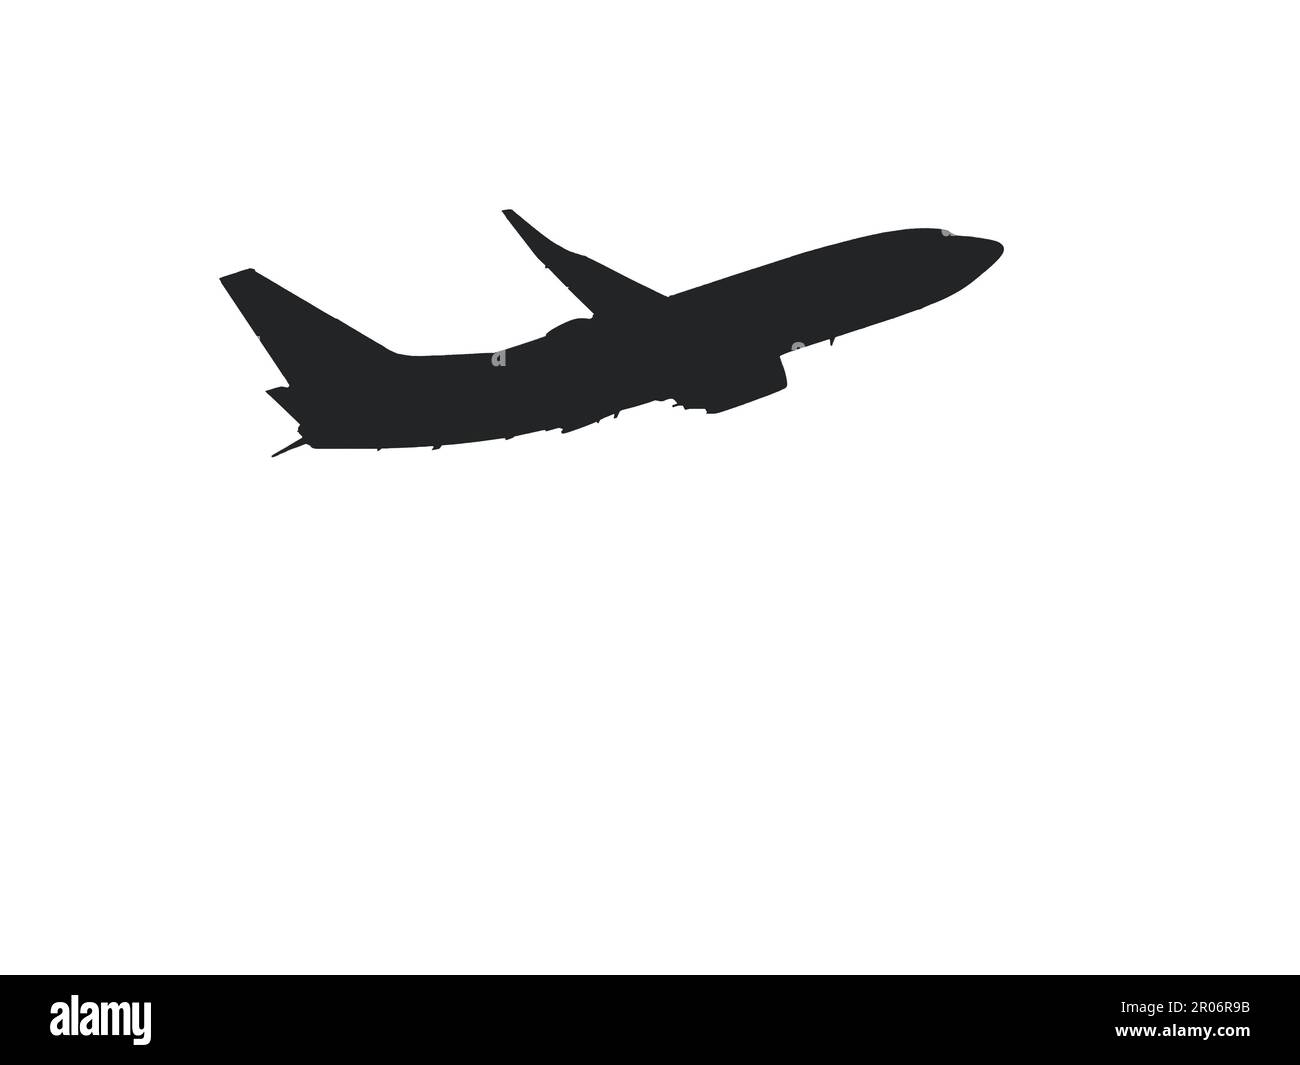 Silhouette of a passenger jet in flight isolated on a plain white background. Backgrounds. Travel concept. No people. Stock Photo